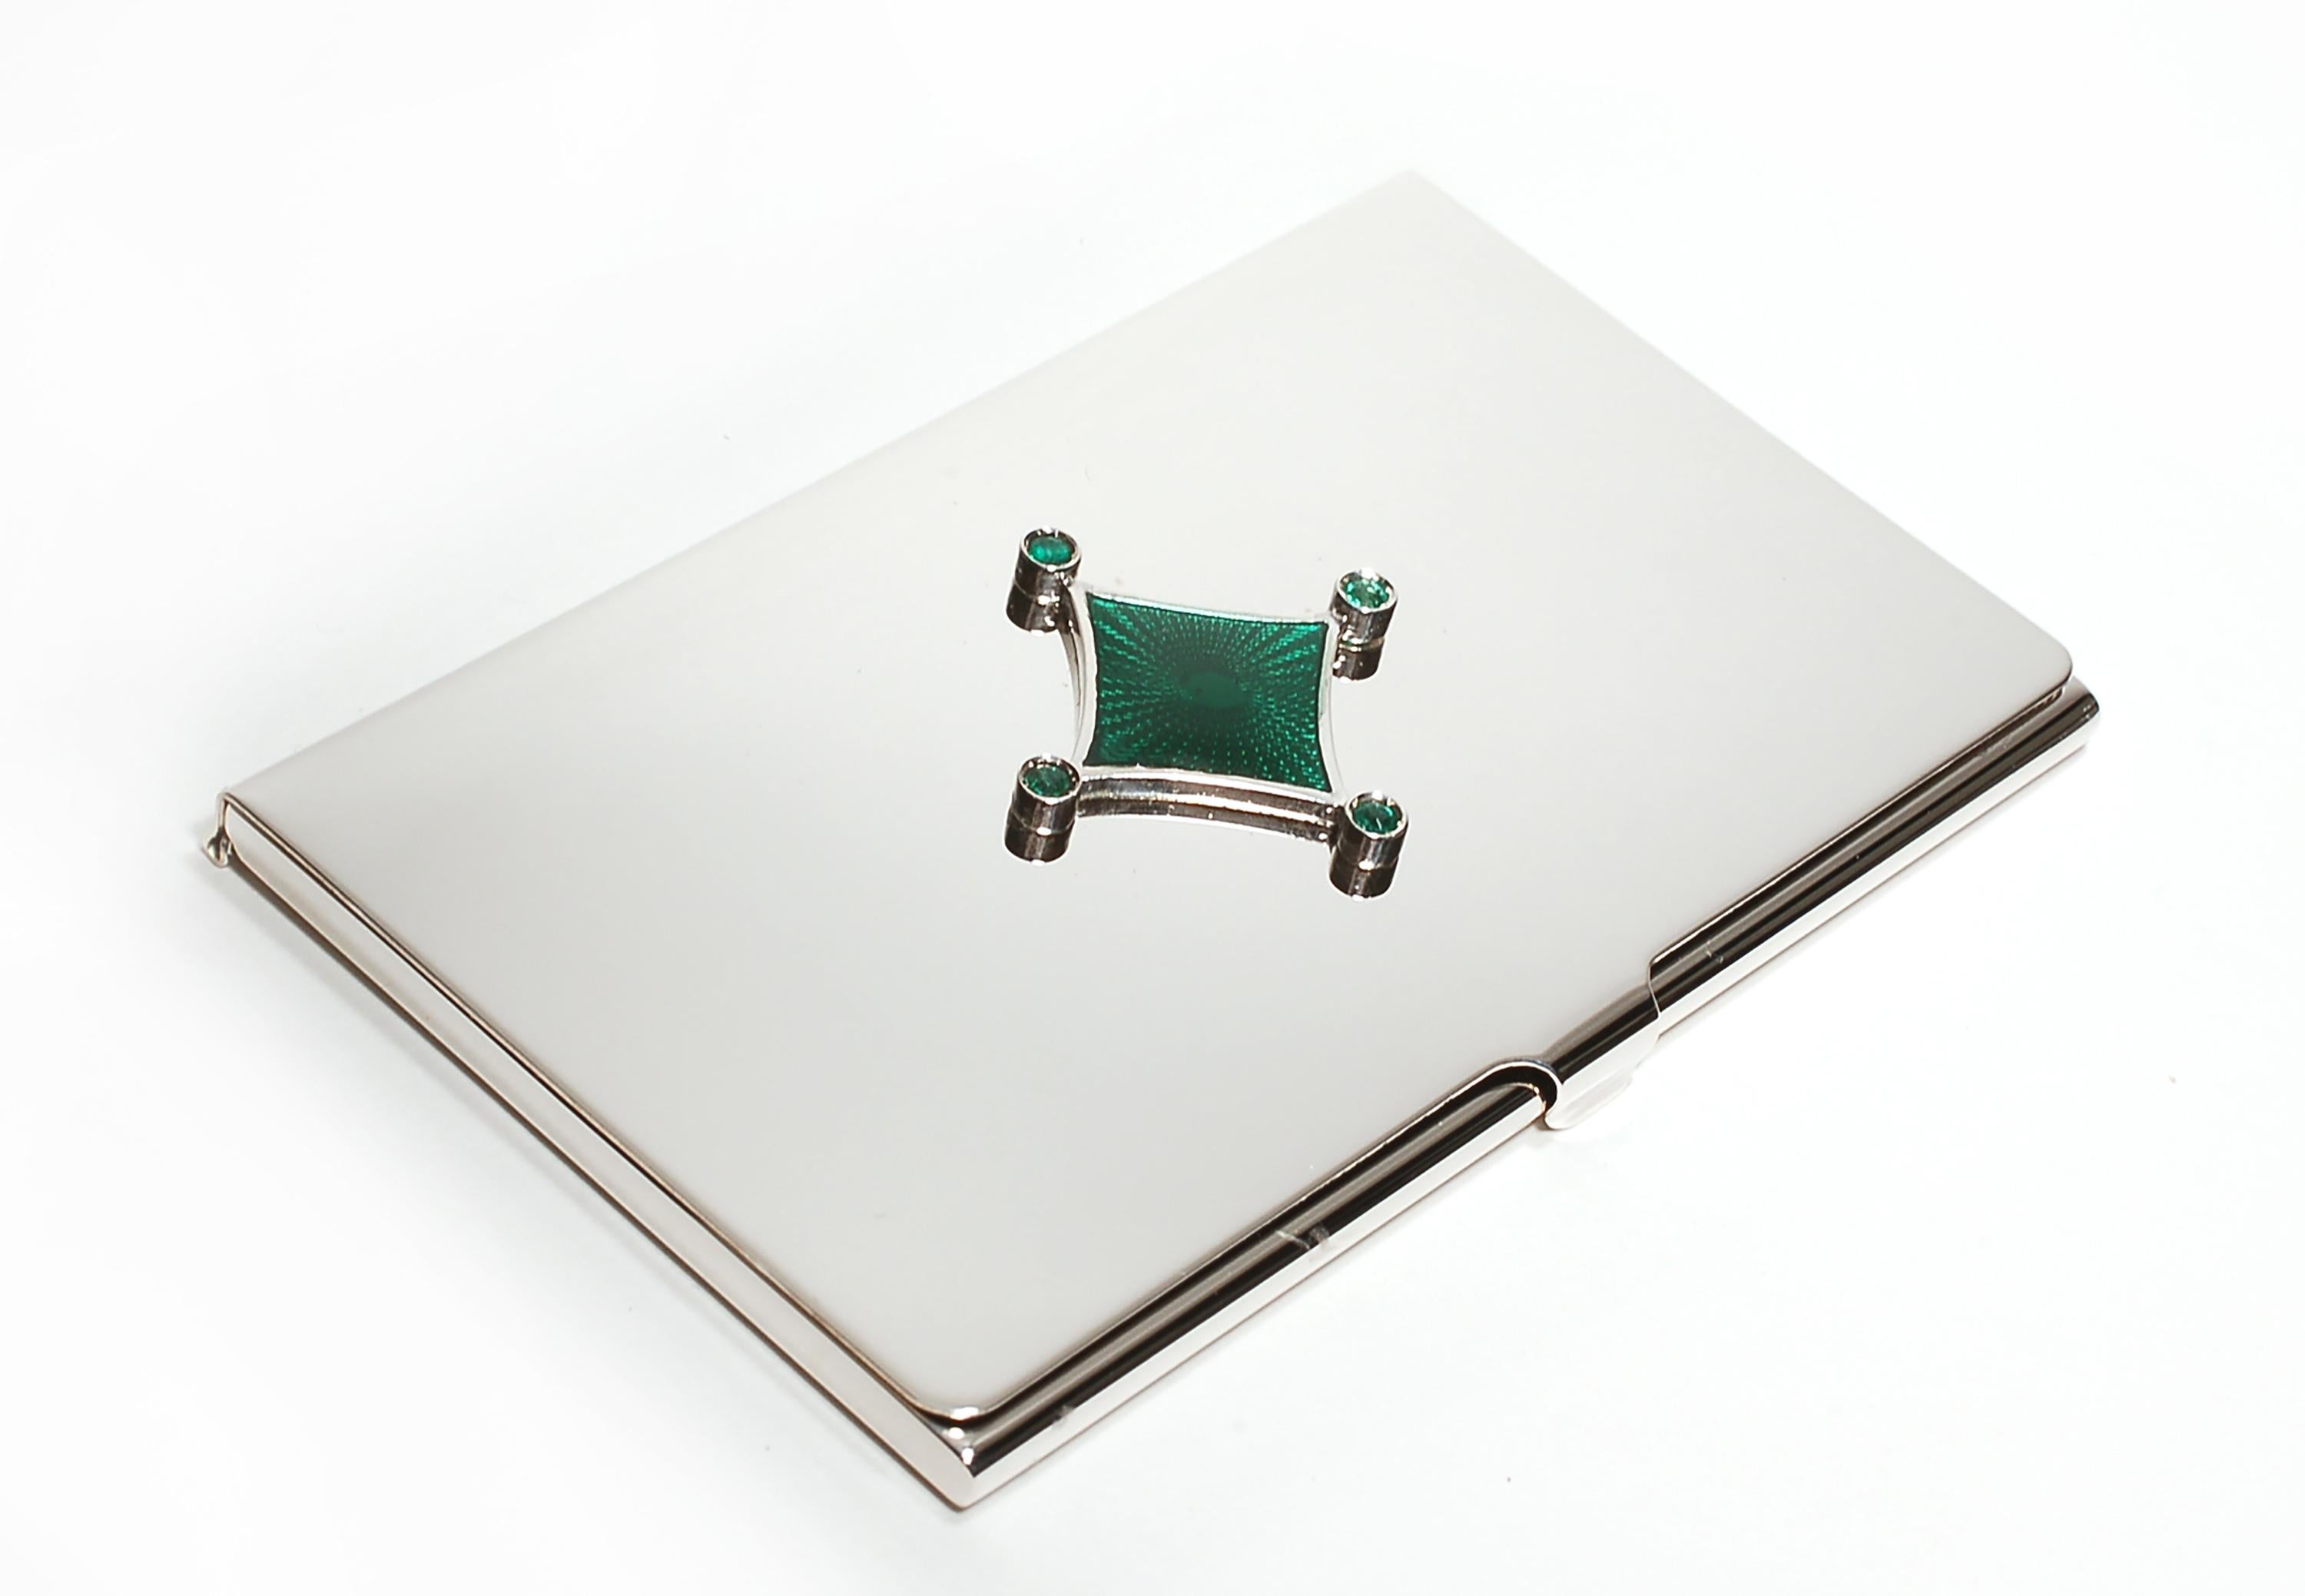 20th-century sterling silver Guilloché green enamel card case
Round emeralds weighing 0.45 carats
Handmade in Italy
White gold plated
The Ocie Minaudiere collection was created to incorporate precious gemstones into evening luxury Minaudière
Ocie's